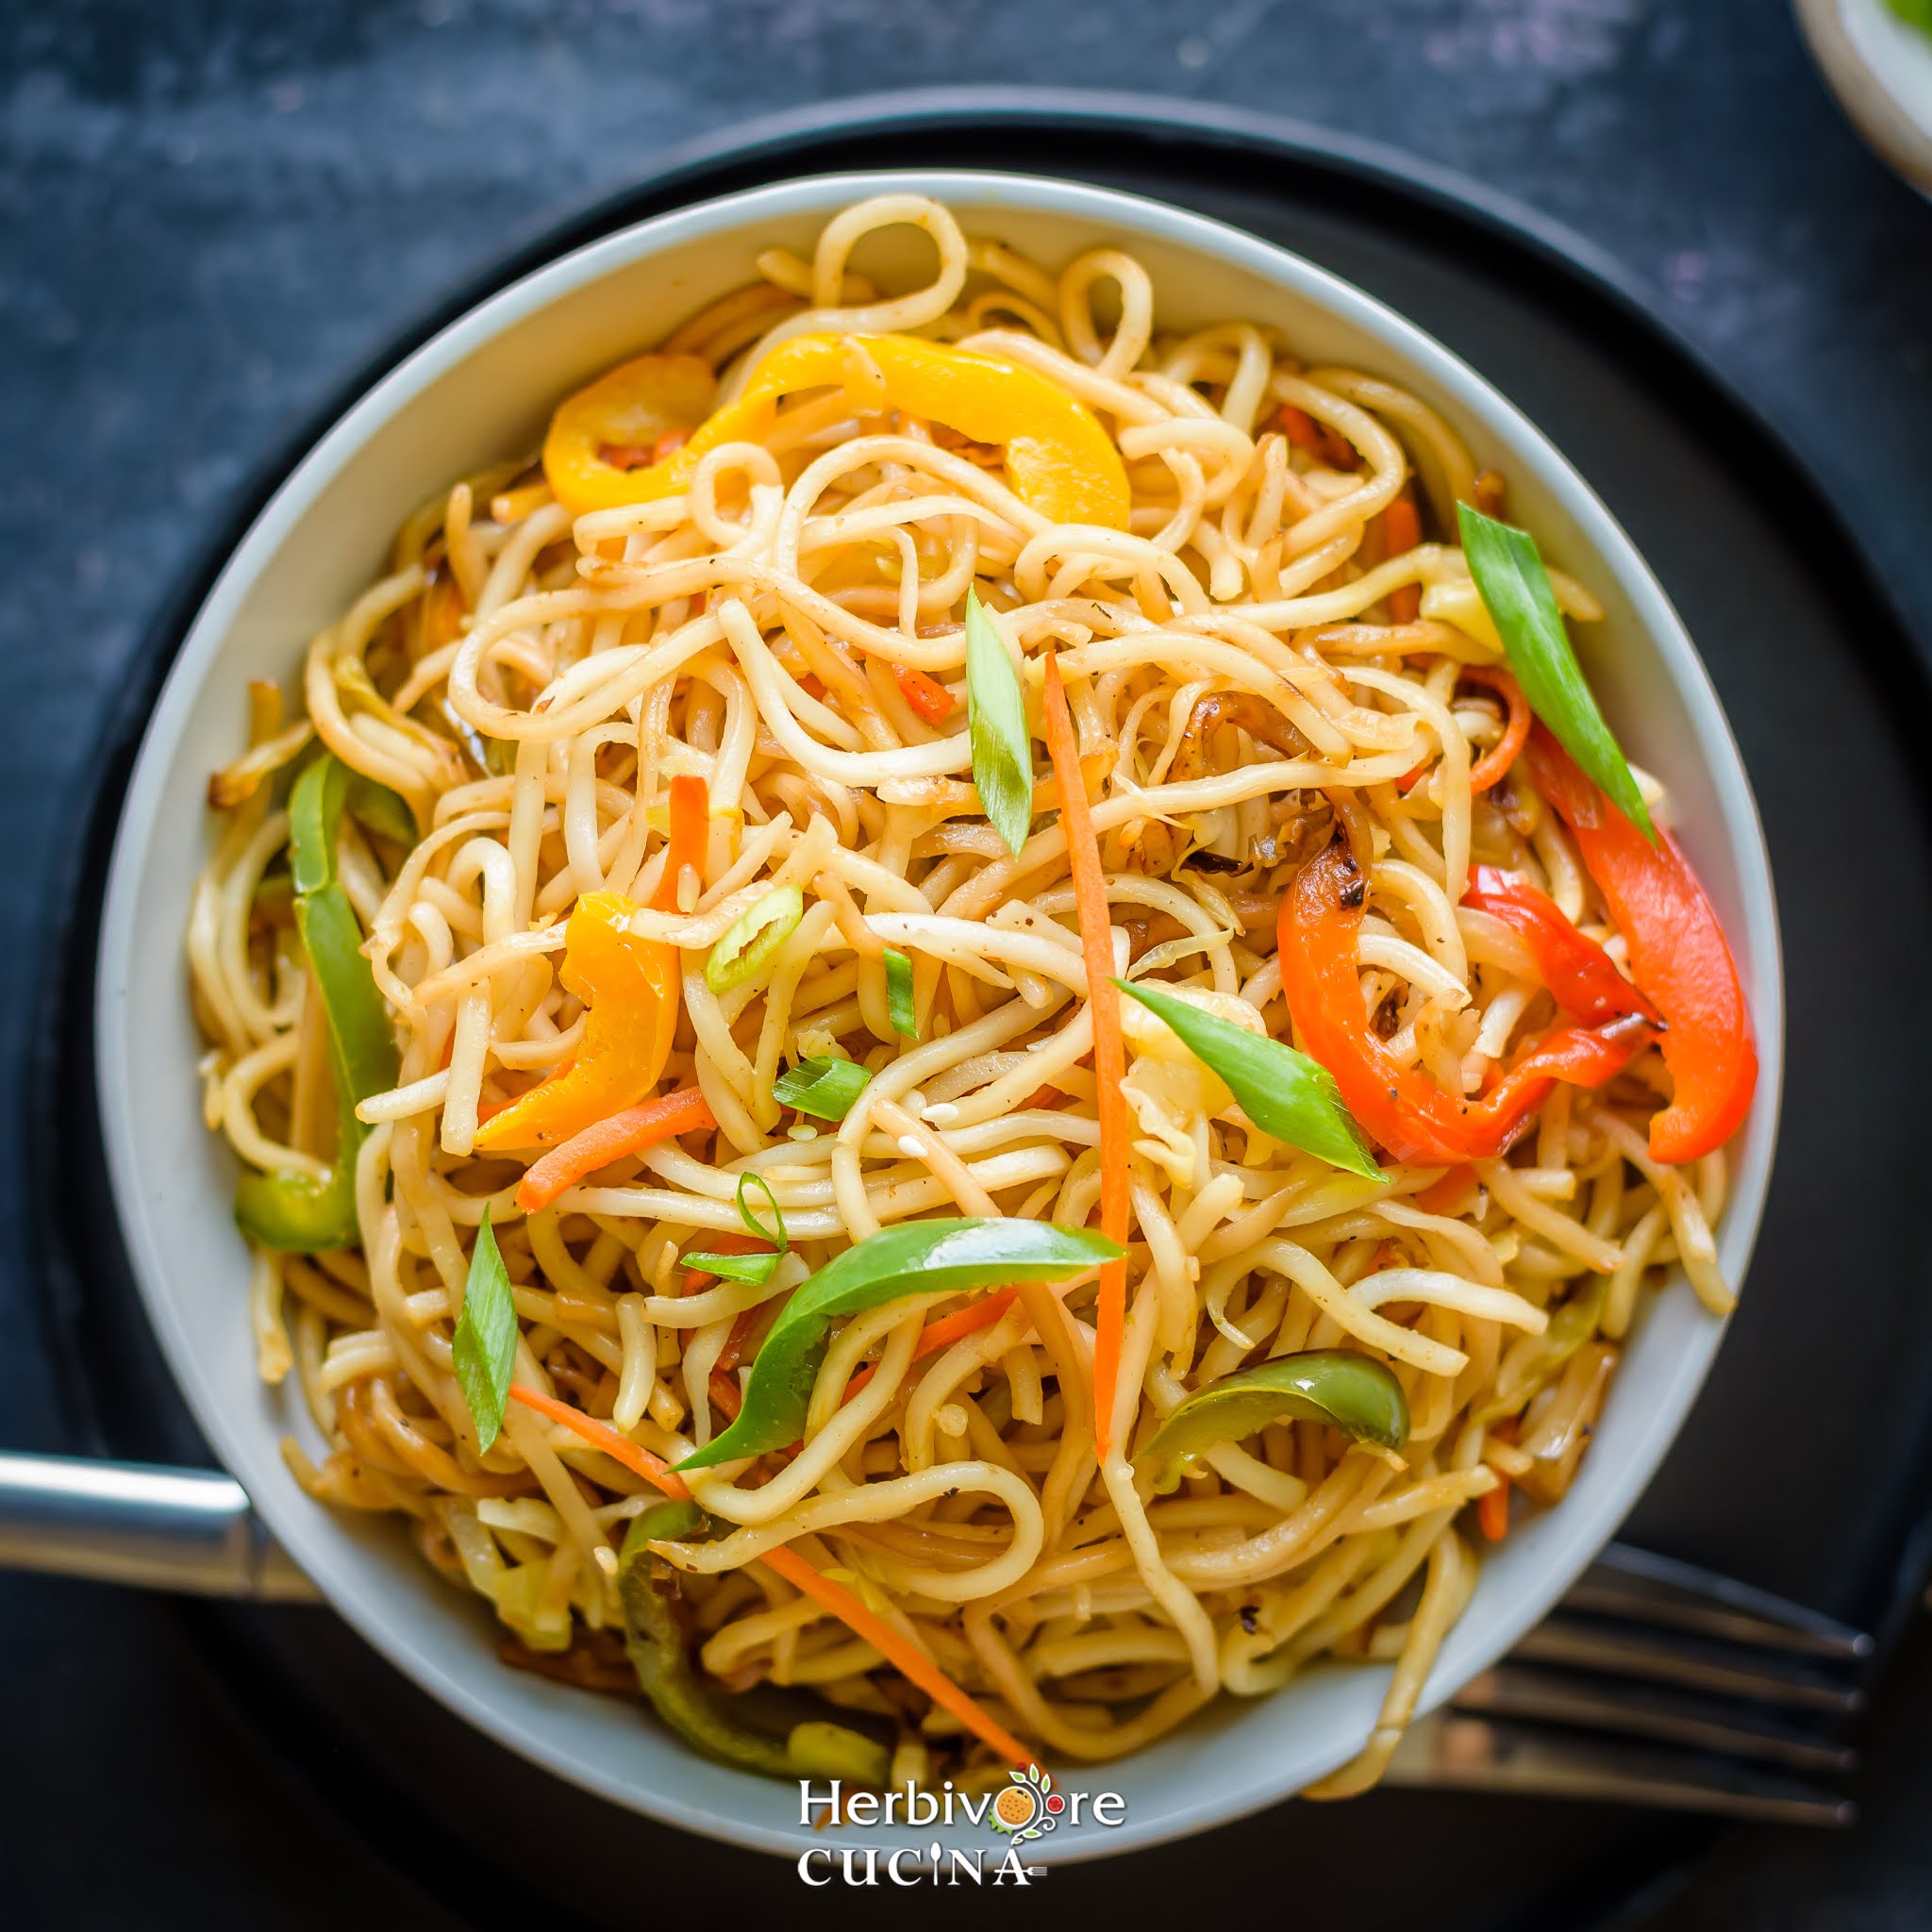 Top view of Hakka Noodles, a mix of noodles and vegetables with a fork on the side on a black background.